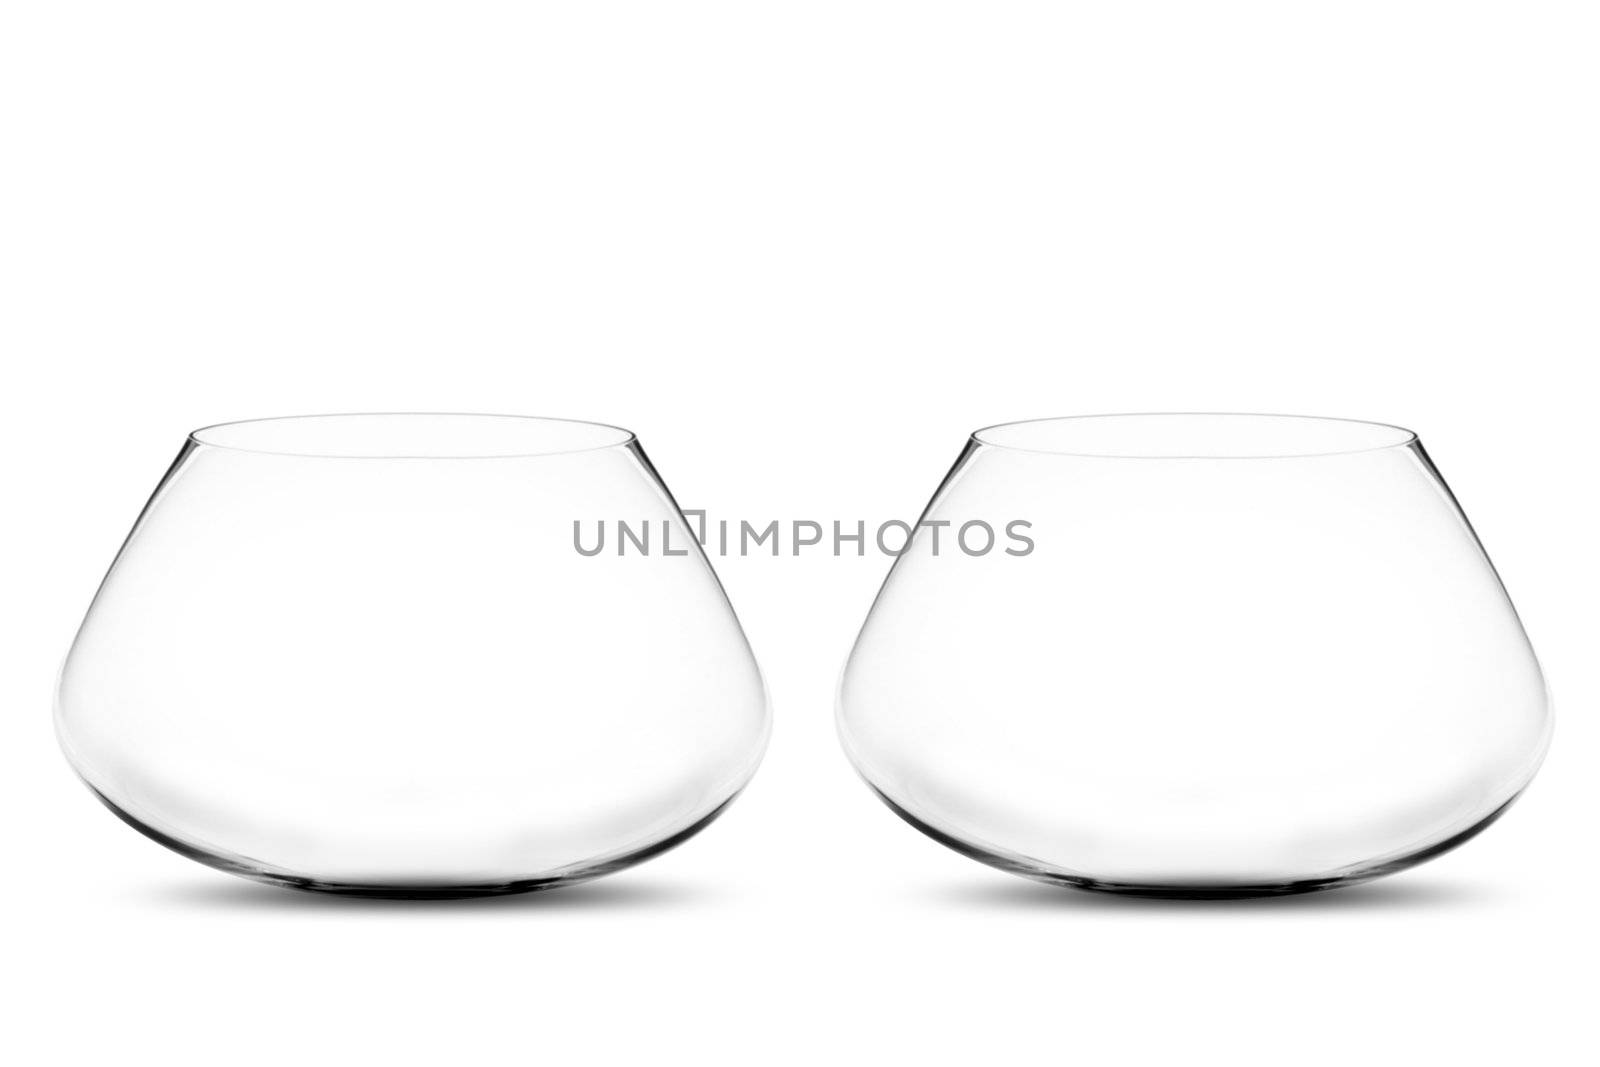 isolated Empty Two fishbowls without water in front of white background.